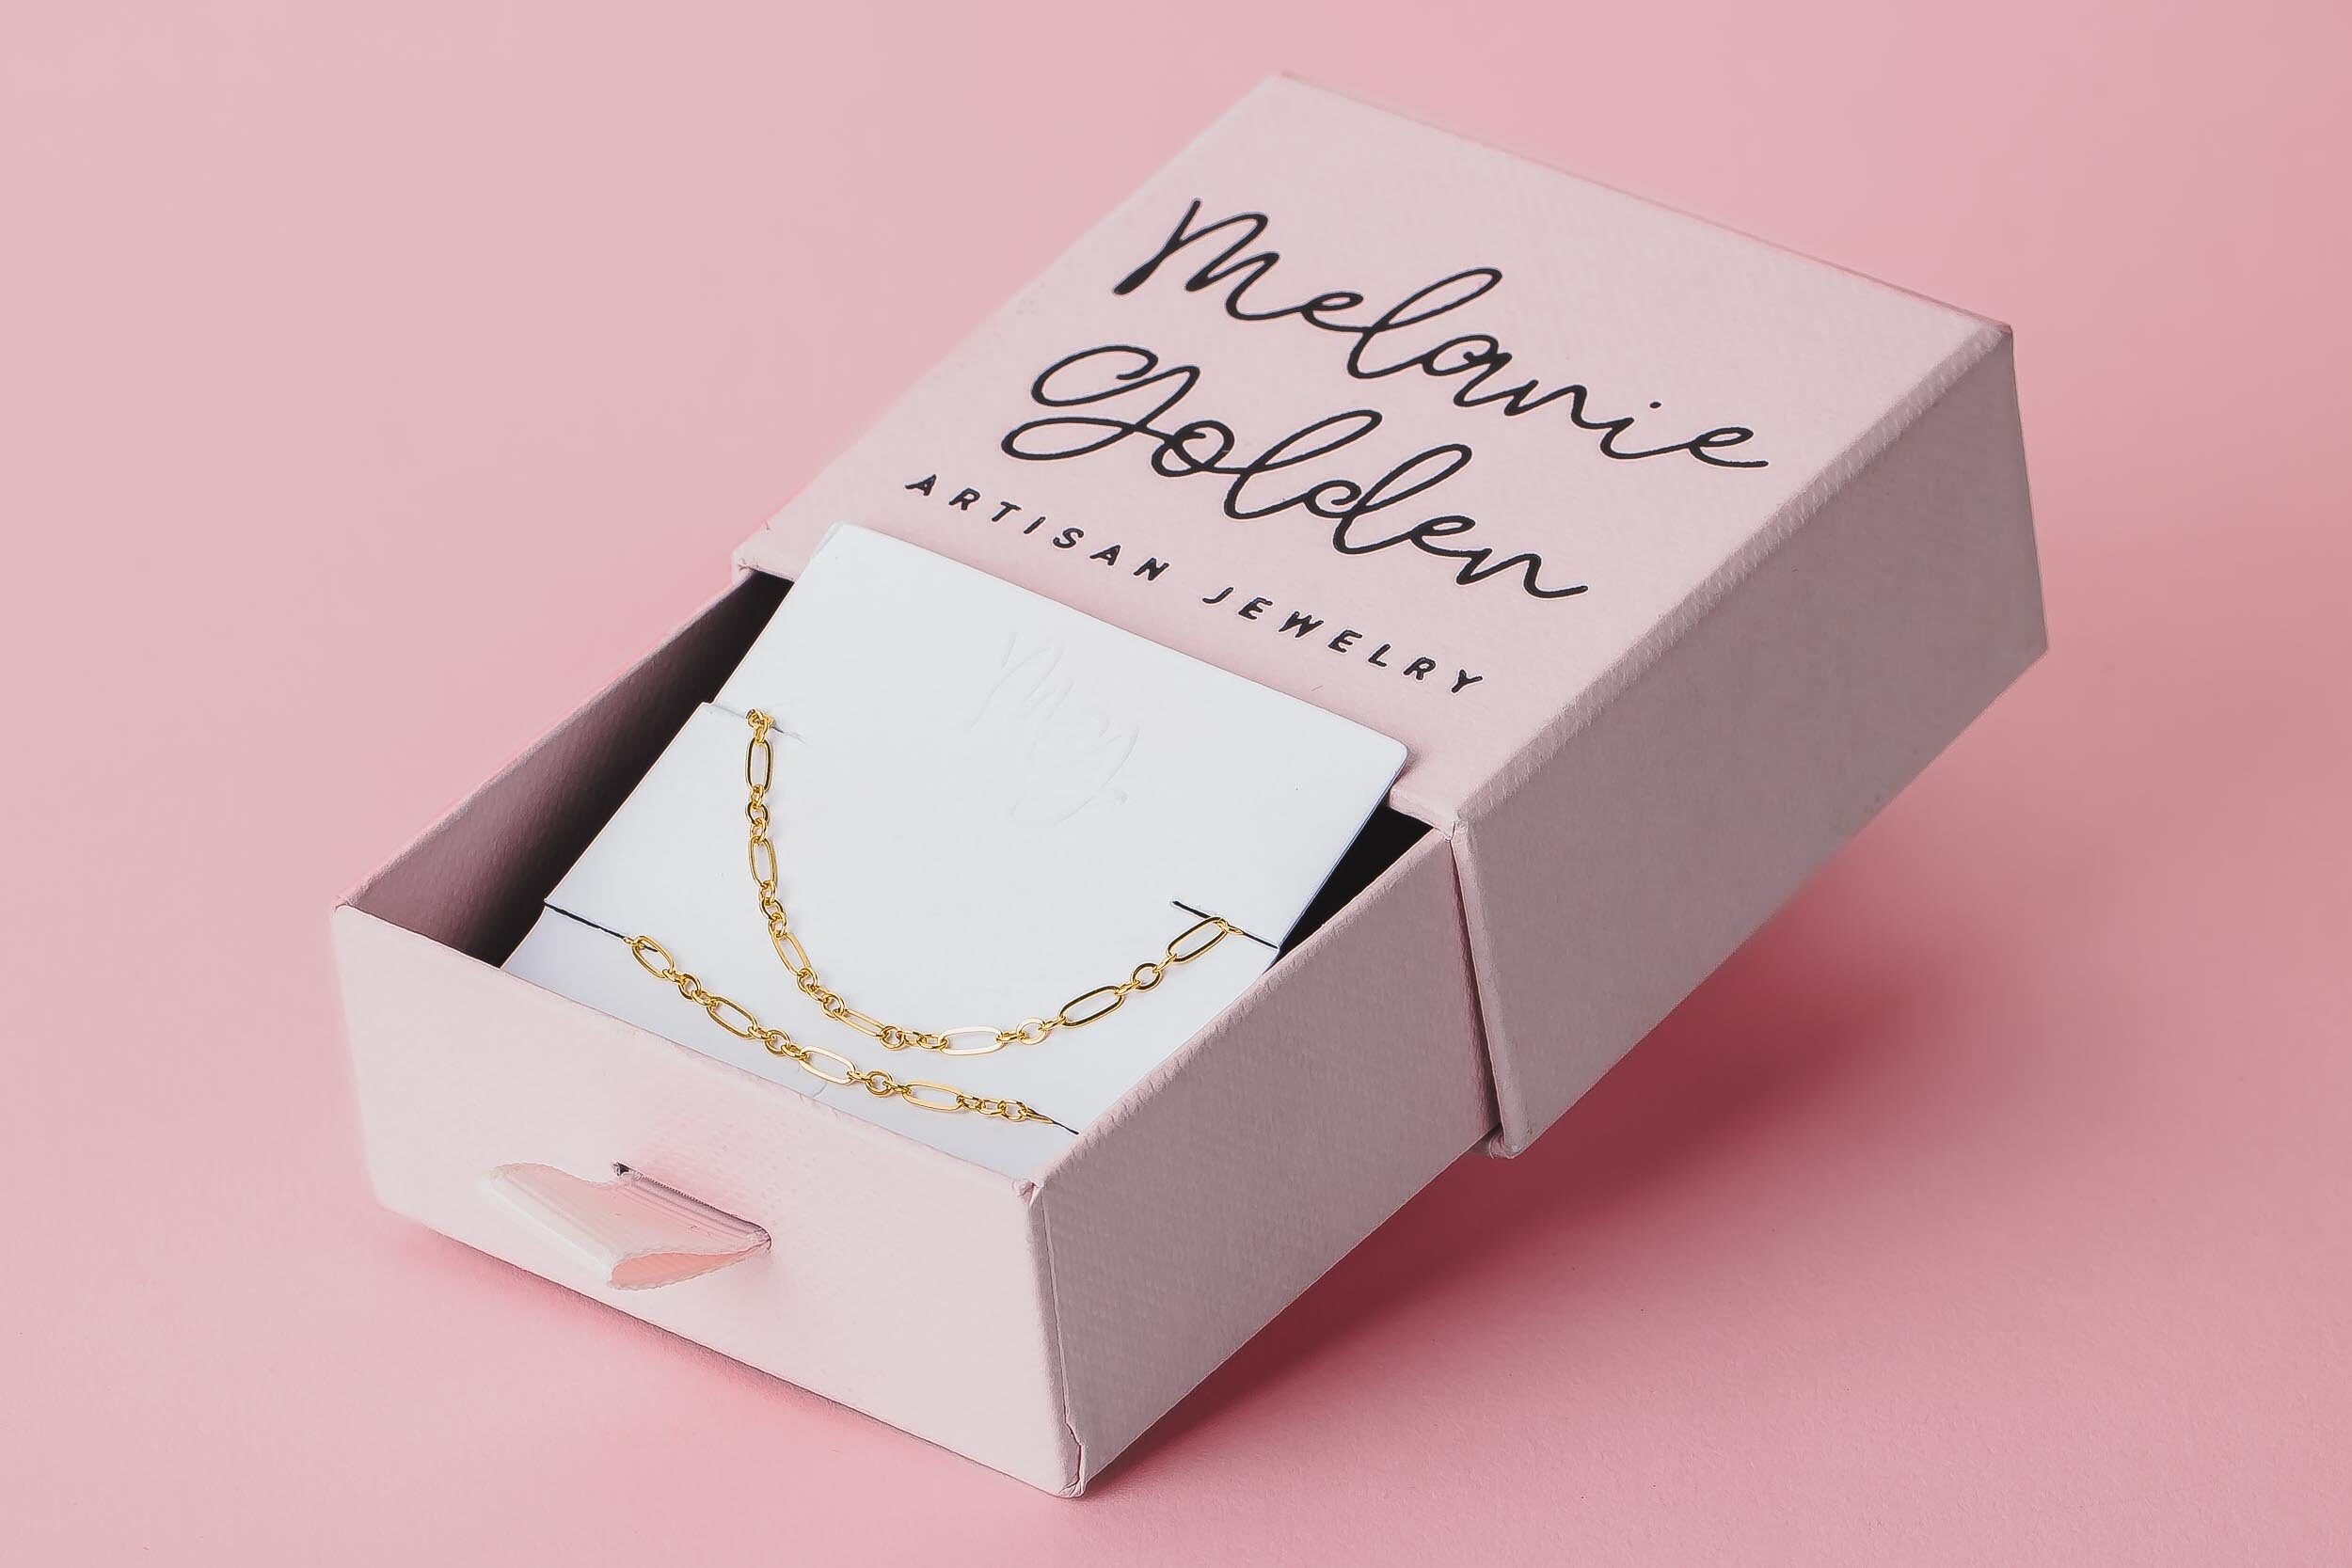 Sadie Chain Necklace & Bracelet Gift Set - Melanie Golden Jewelry - _badge_new, bracelet, bridal party, essential chains, everyday essentials, gift sets, love, necklace, new